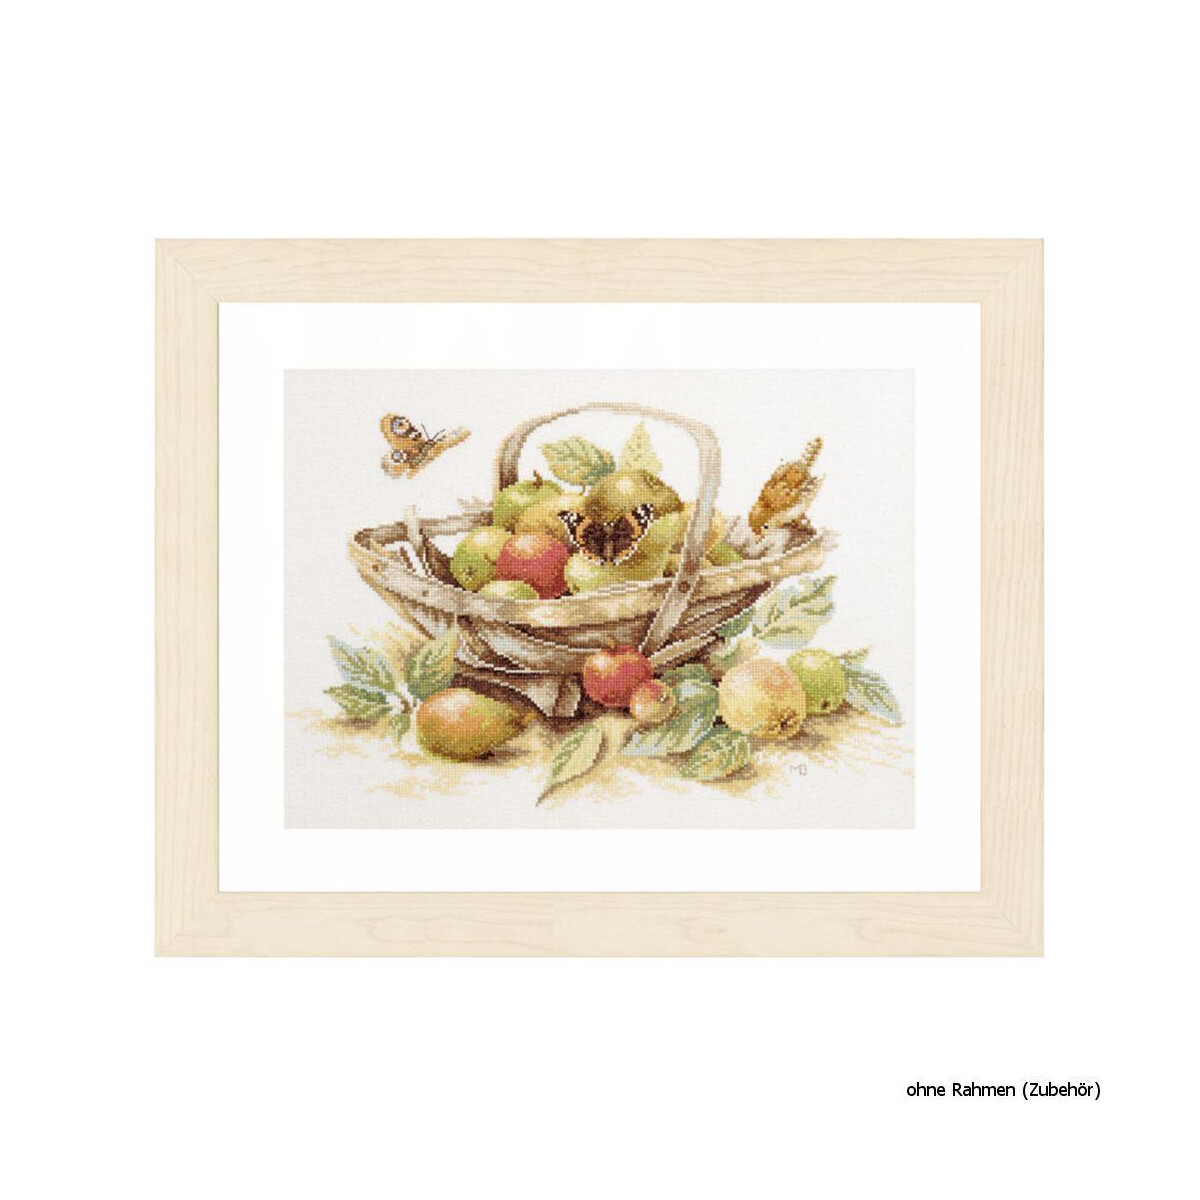 A framed picture shows a basket with various fruits such...